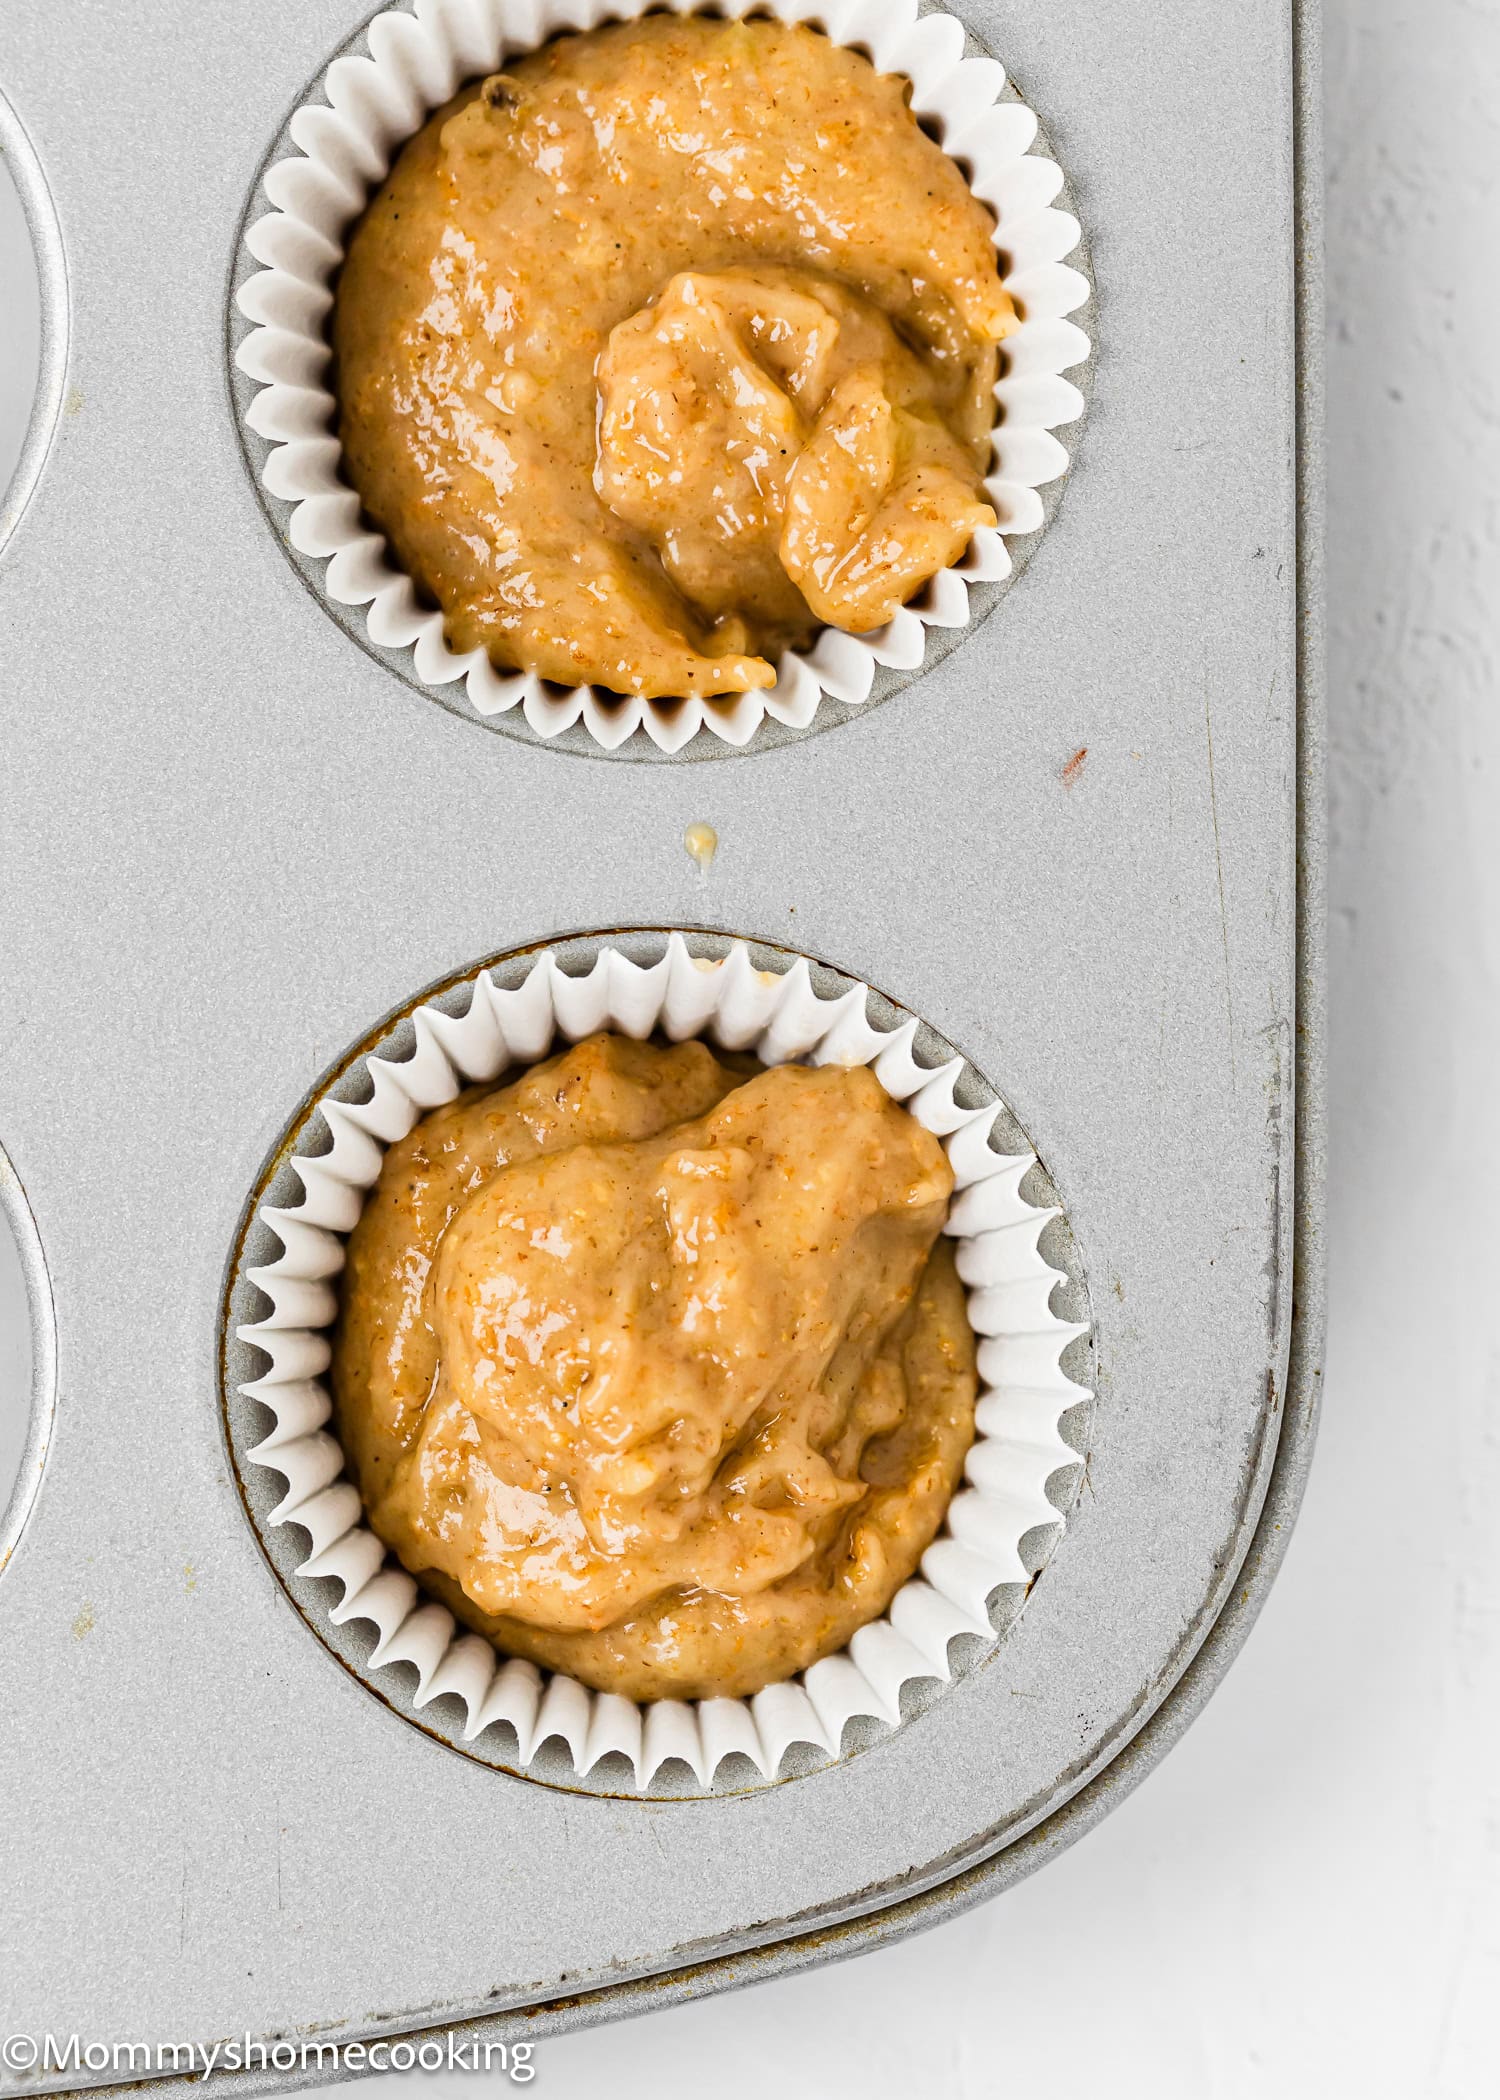 unbaked Healthy Egg-Free, dairy-free and Vegan Mini Banana Muffins in a muffin tin.